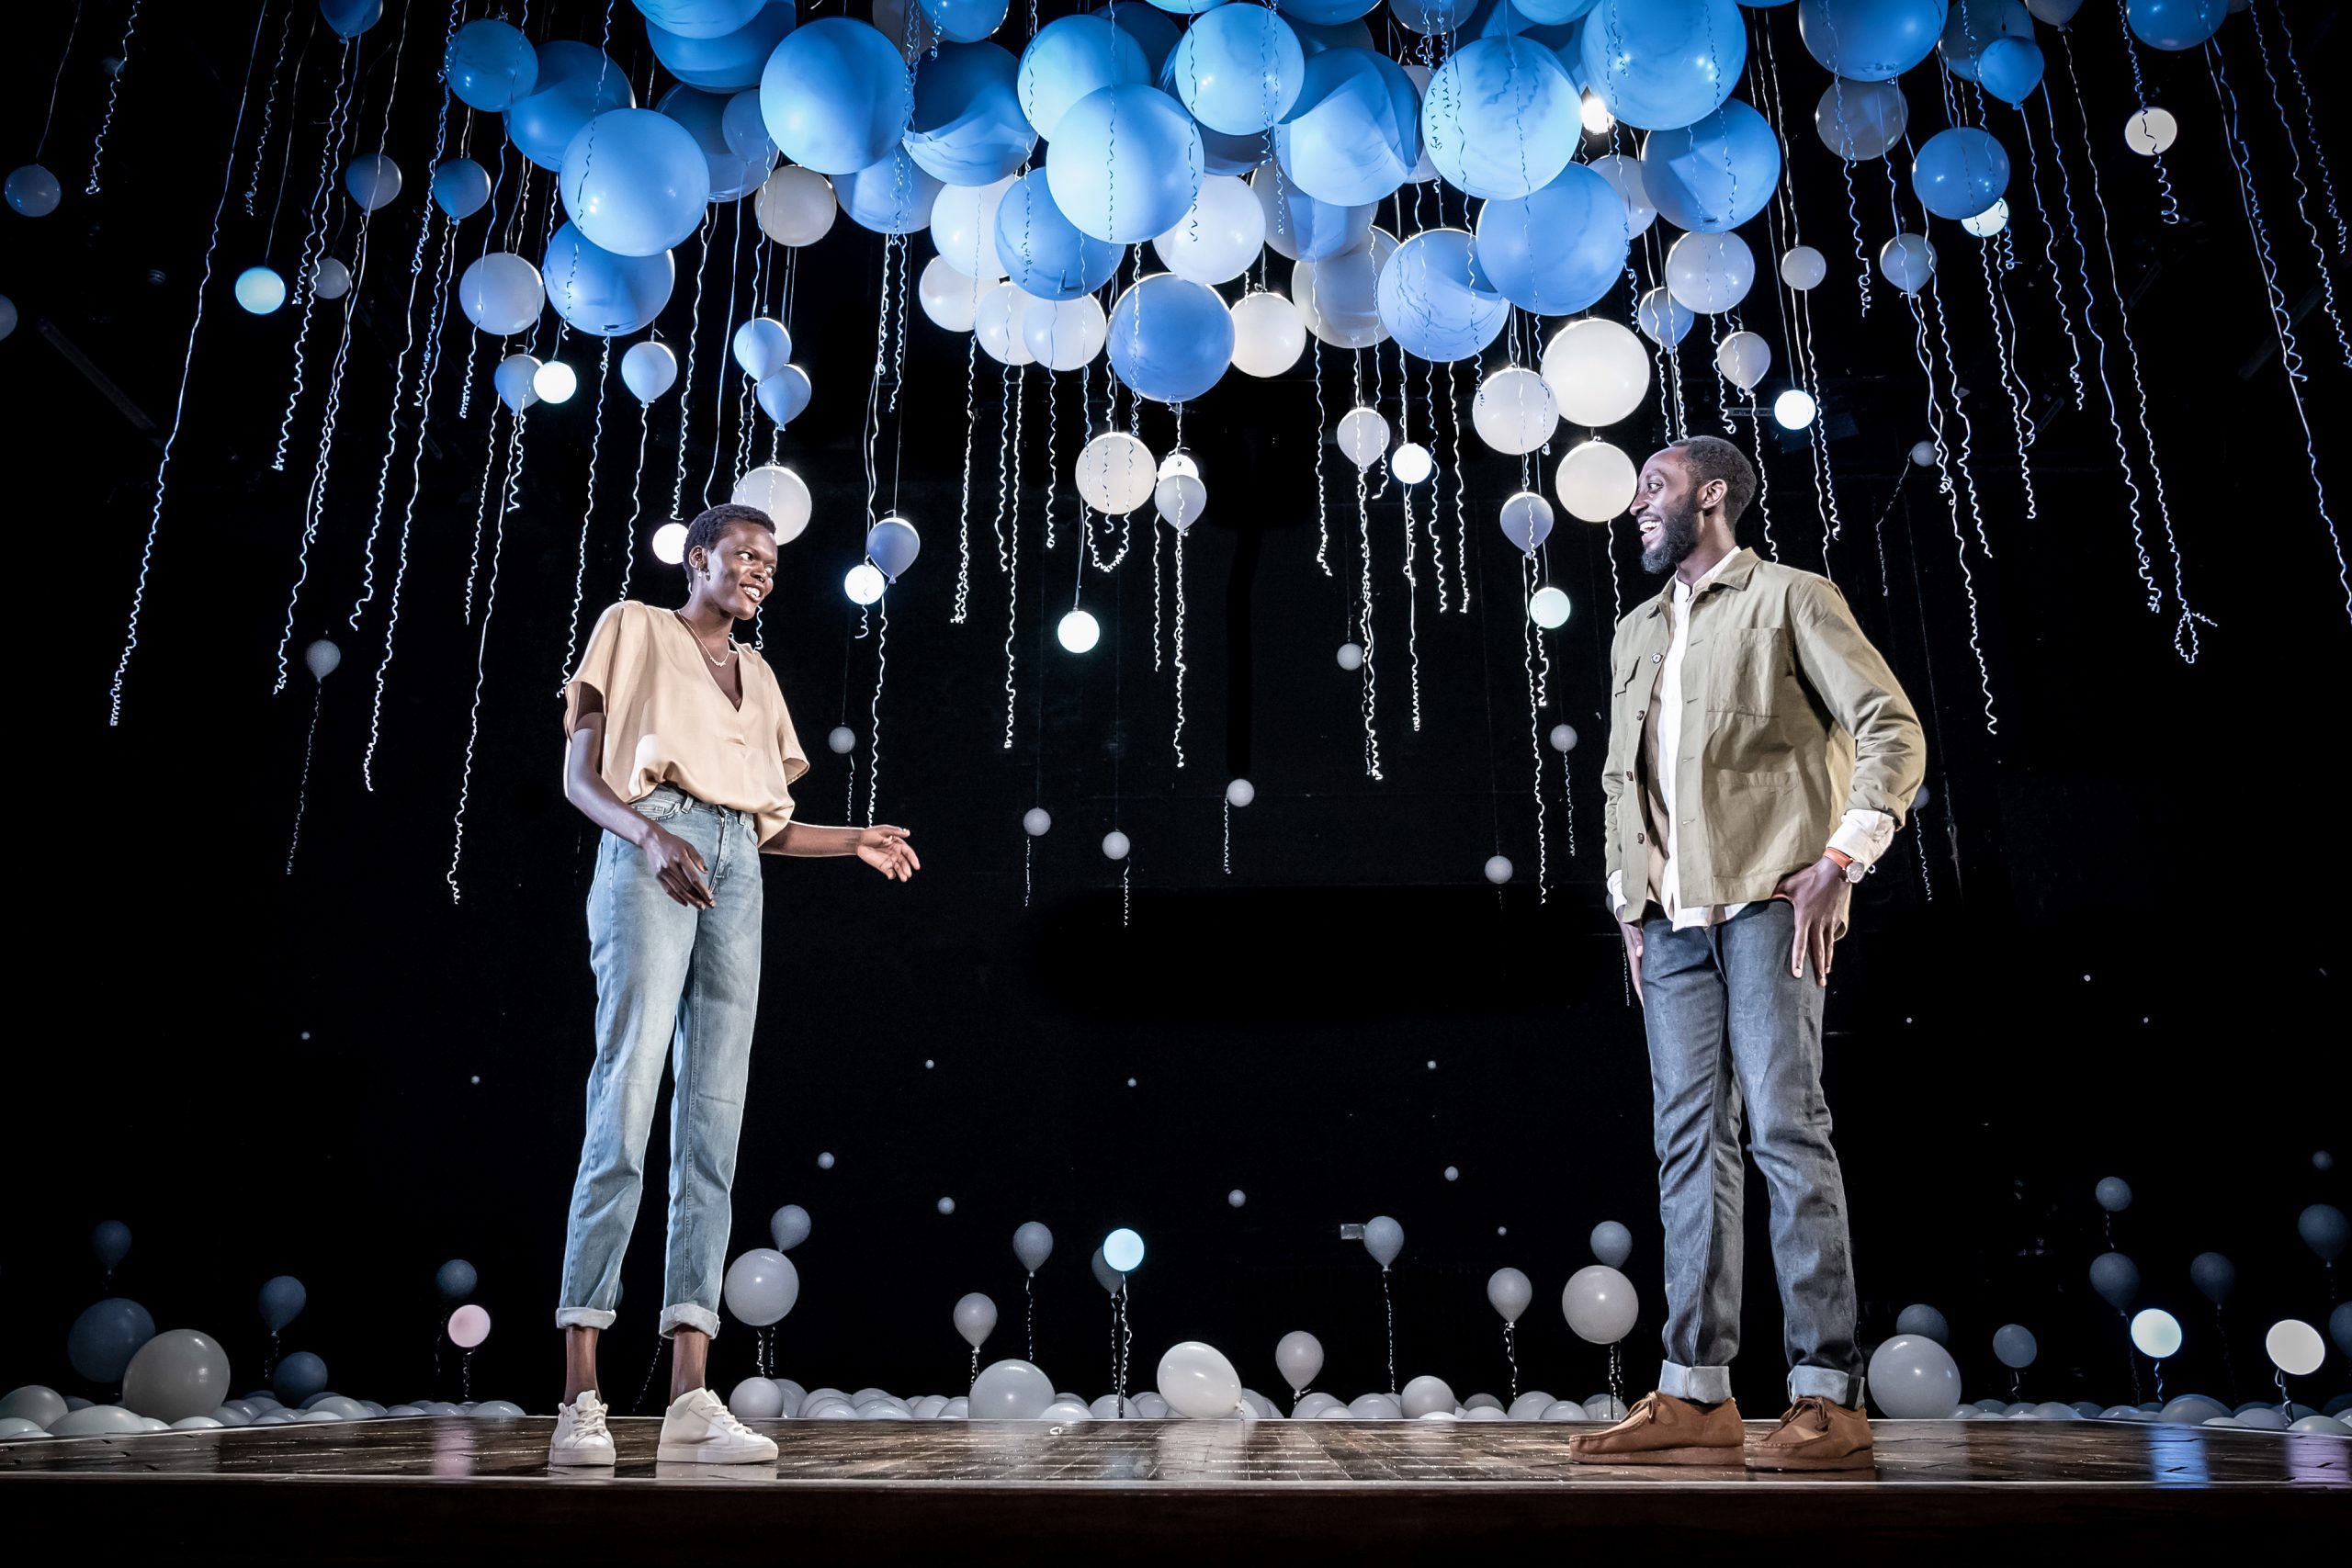 A female and male figure standing on stage with white and blue balloons floating above them.